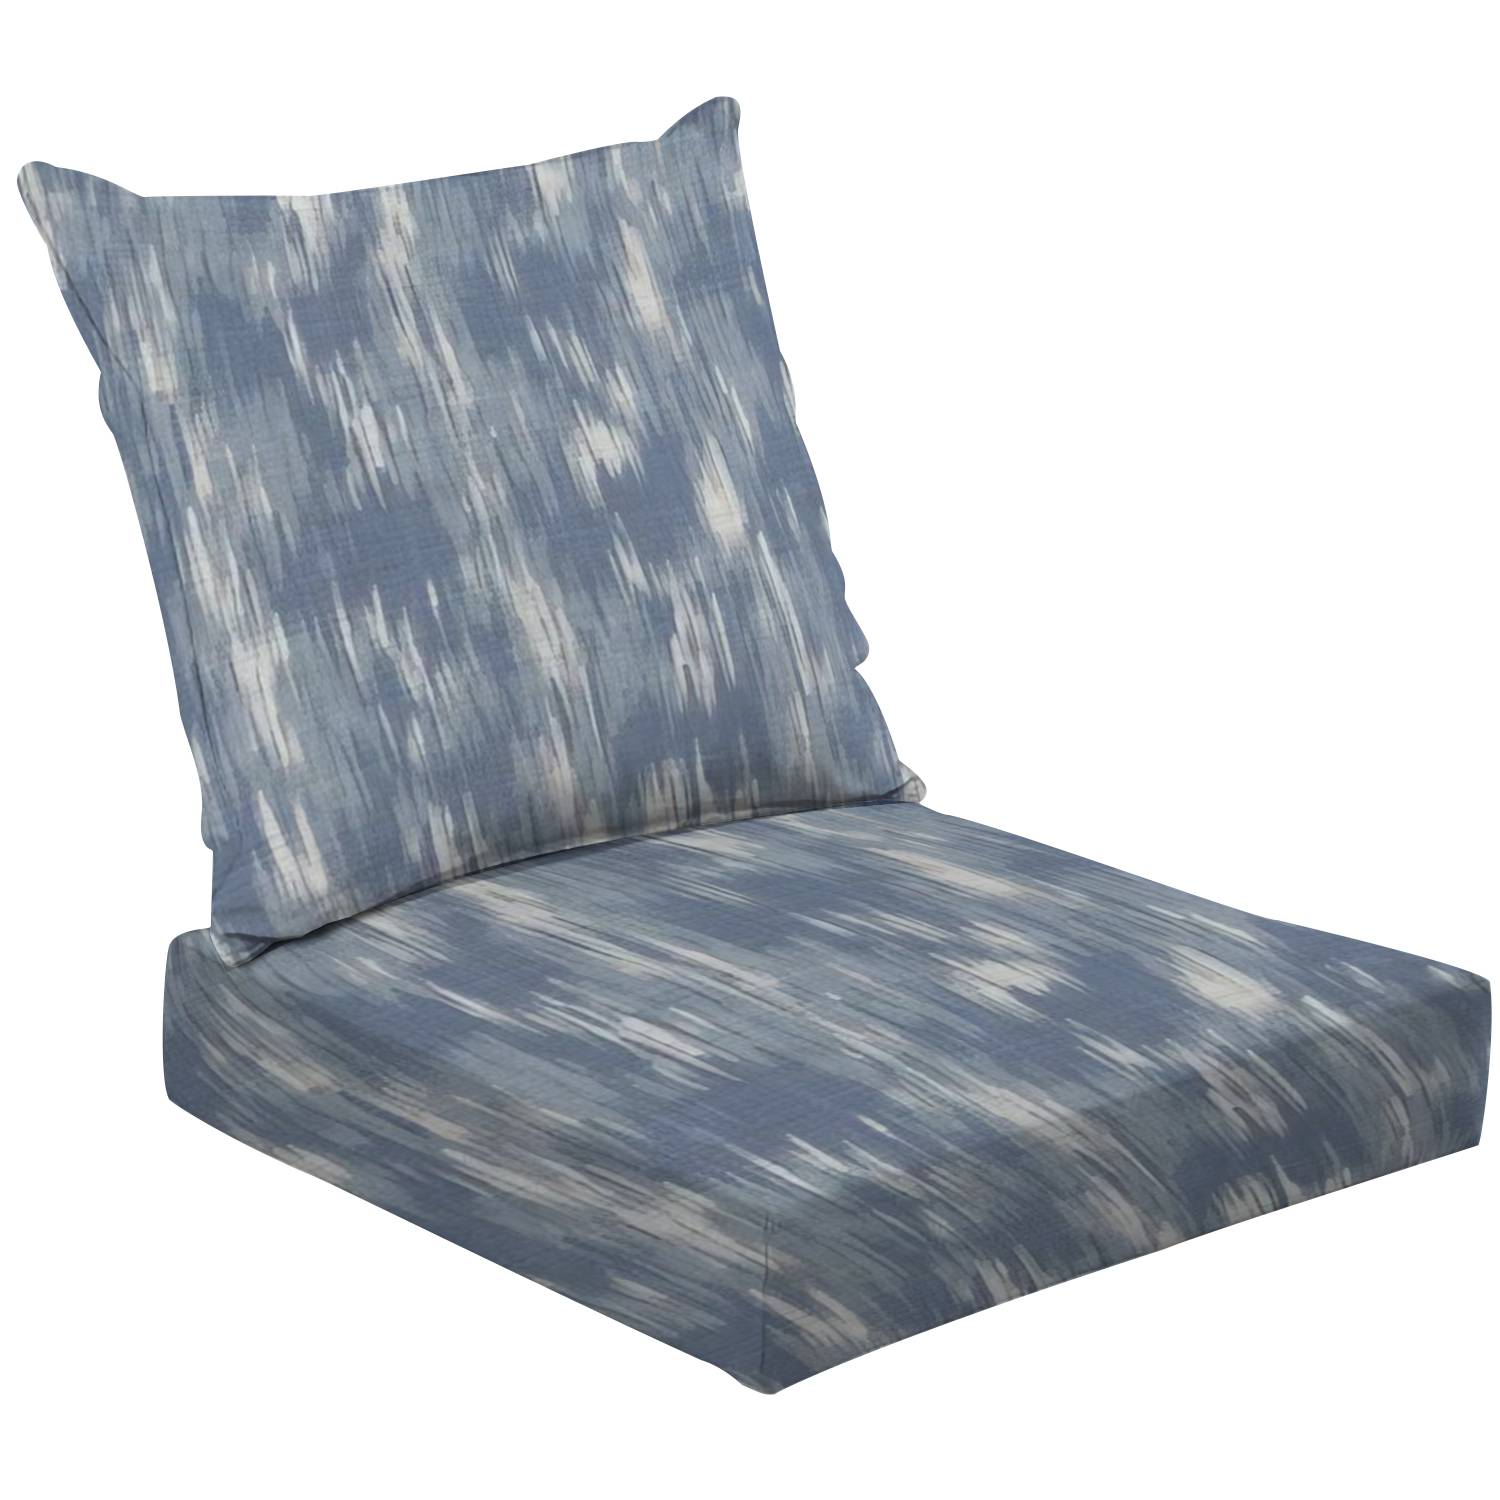 2-Piece Deep Seating Cushion Set Seamless french farmhouse linen mottled print Provence blue gray linen Outdoor Chair Solid Rectangle Patio Cushion Set - image 1 of 1